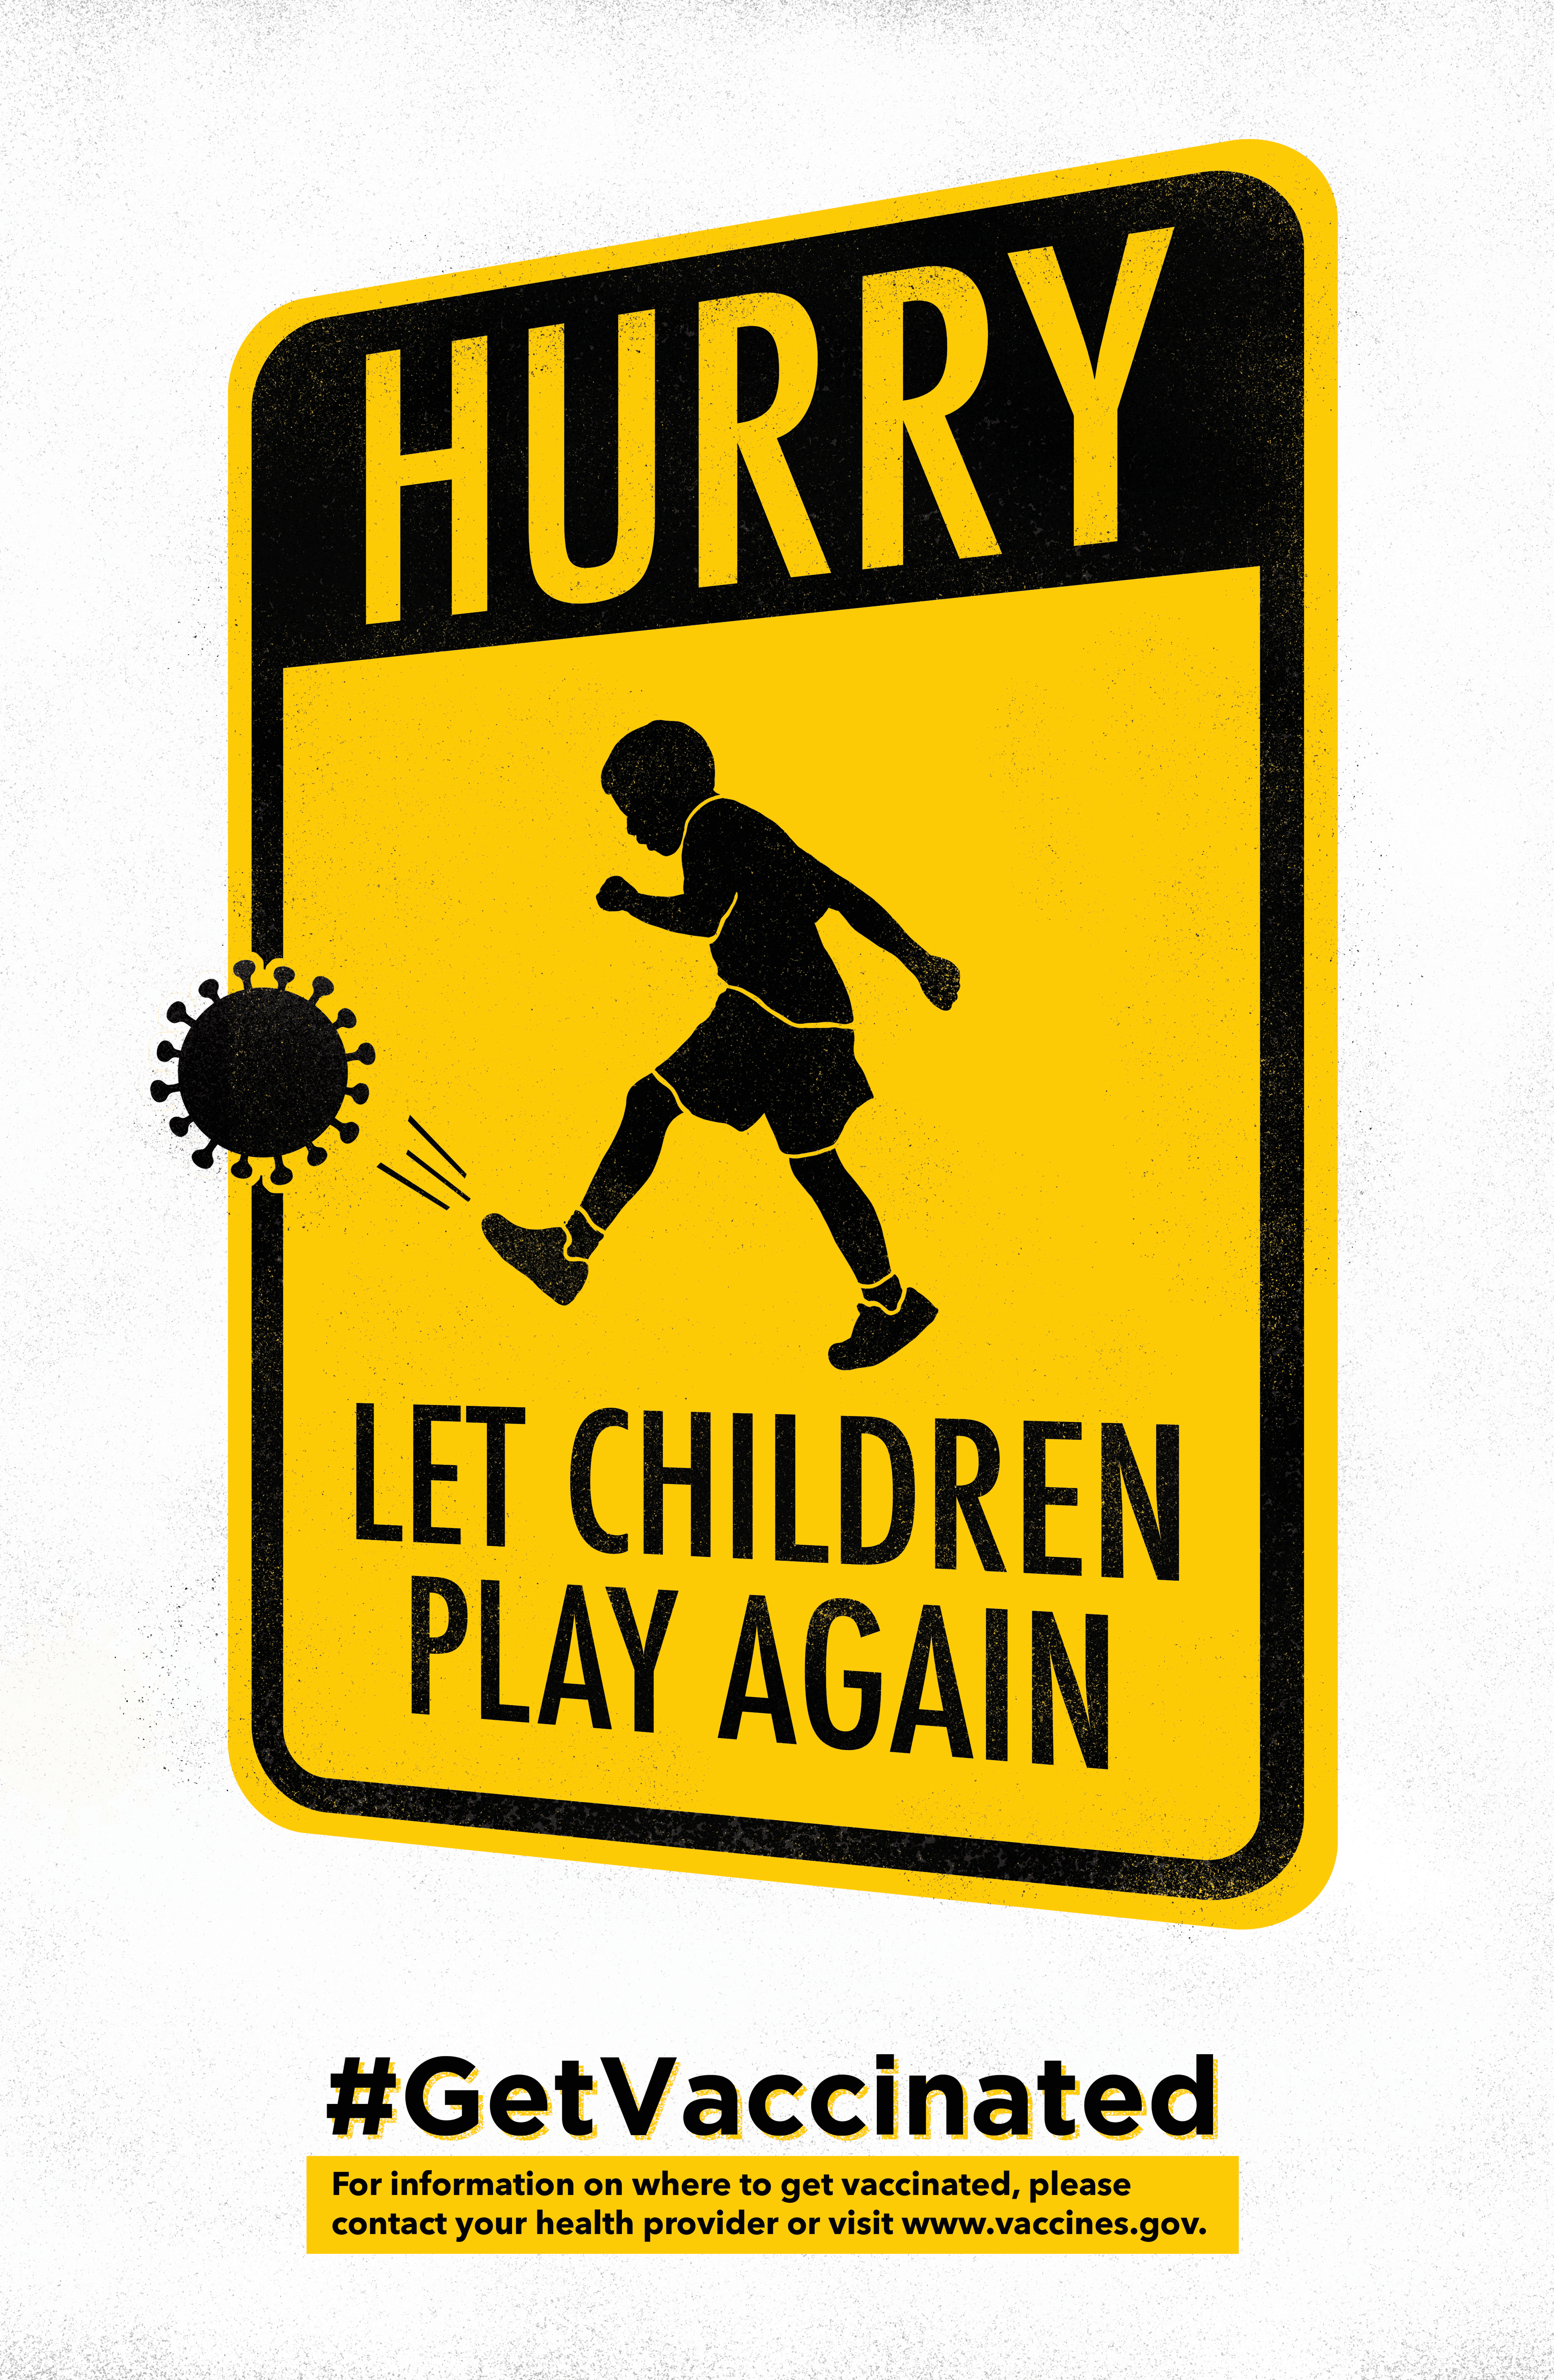 Poster shows a cartoon silhouette of a child playing in the style of a "children playing" street sign